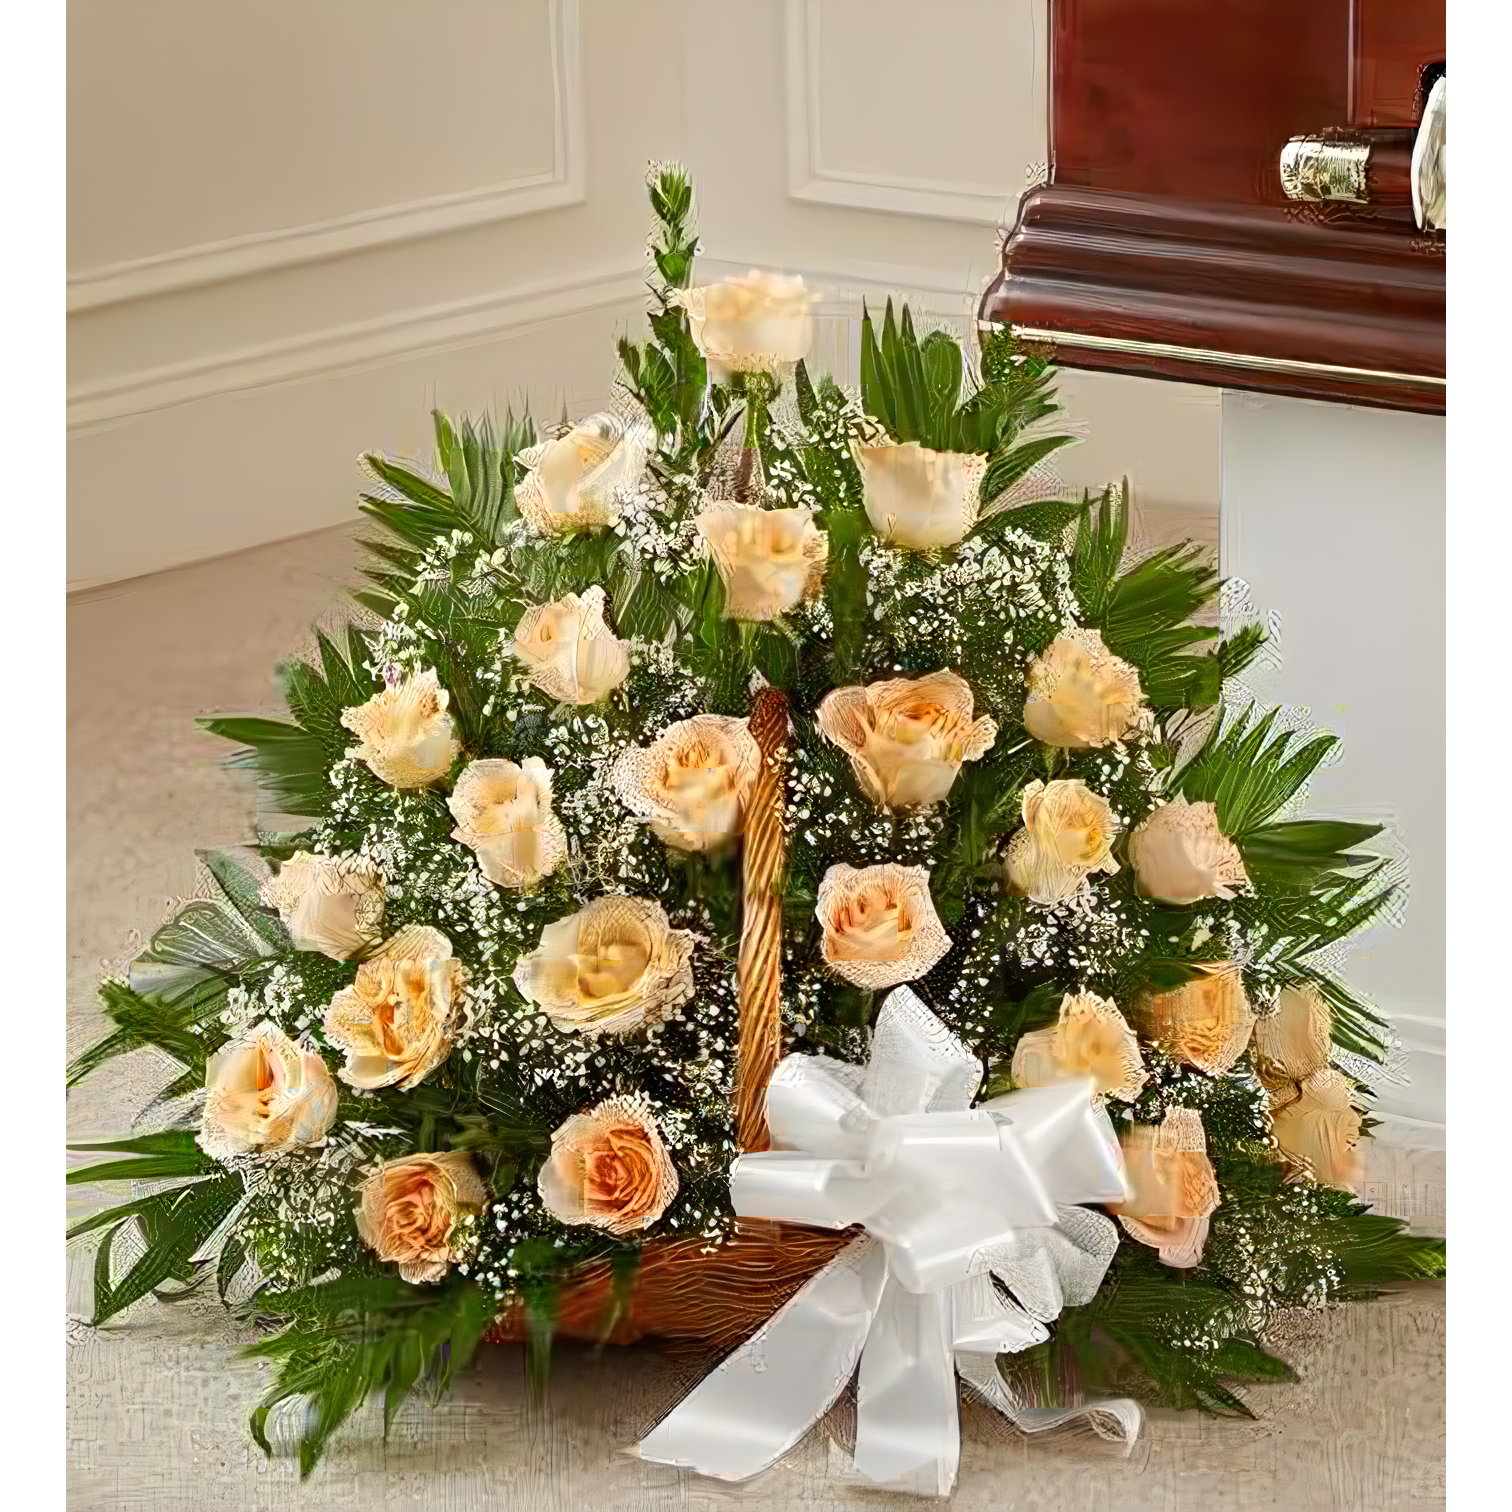 NYC Flower Delivery - Sincerest Sympathy Fireside Basket - Funeral > For the Service